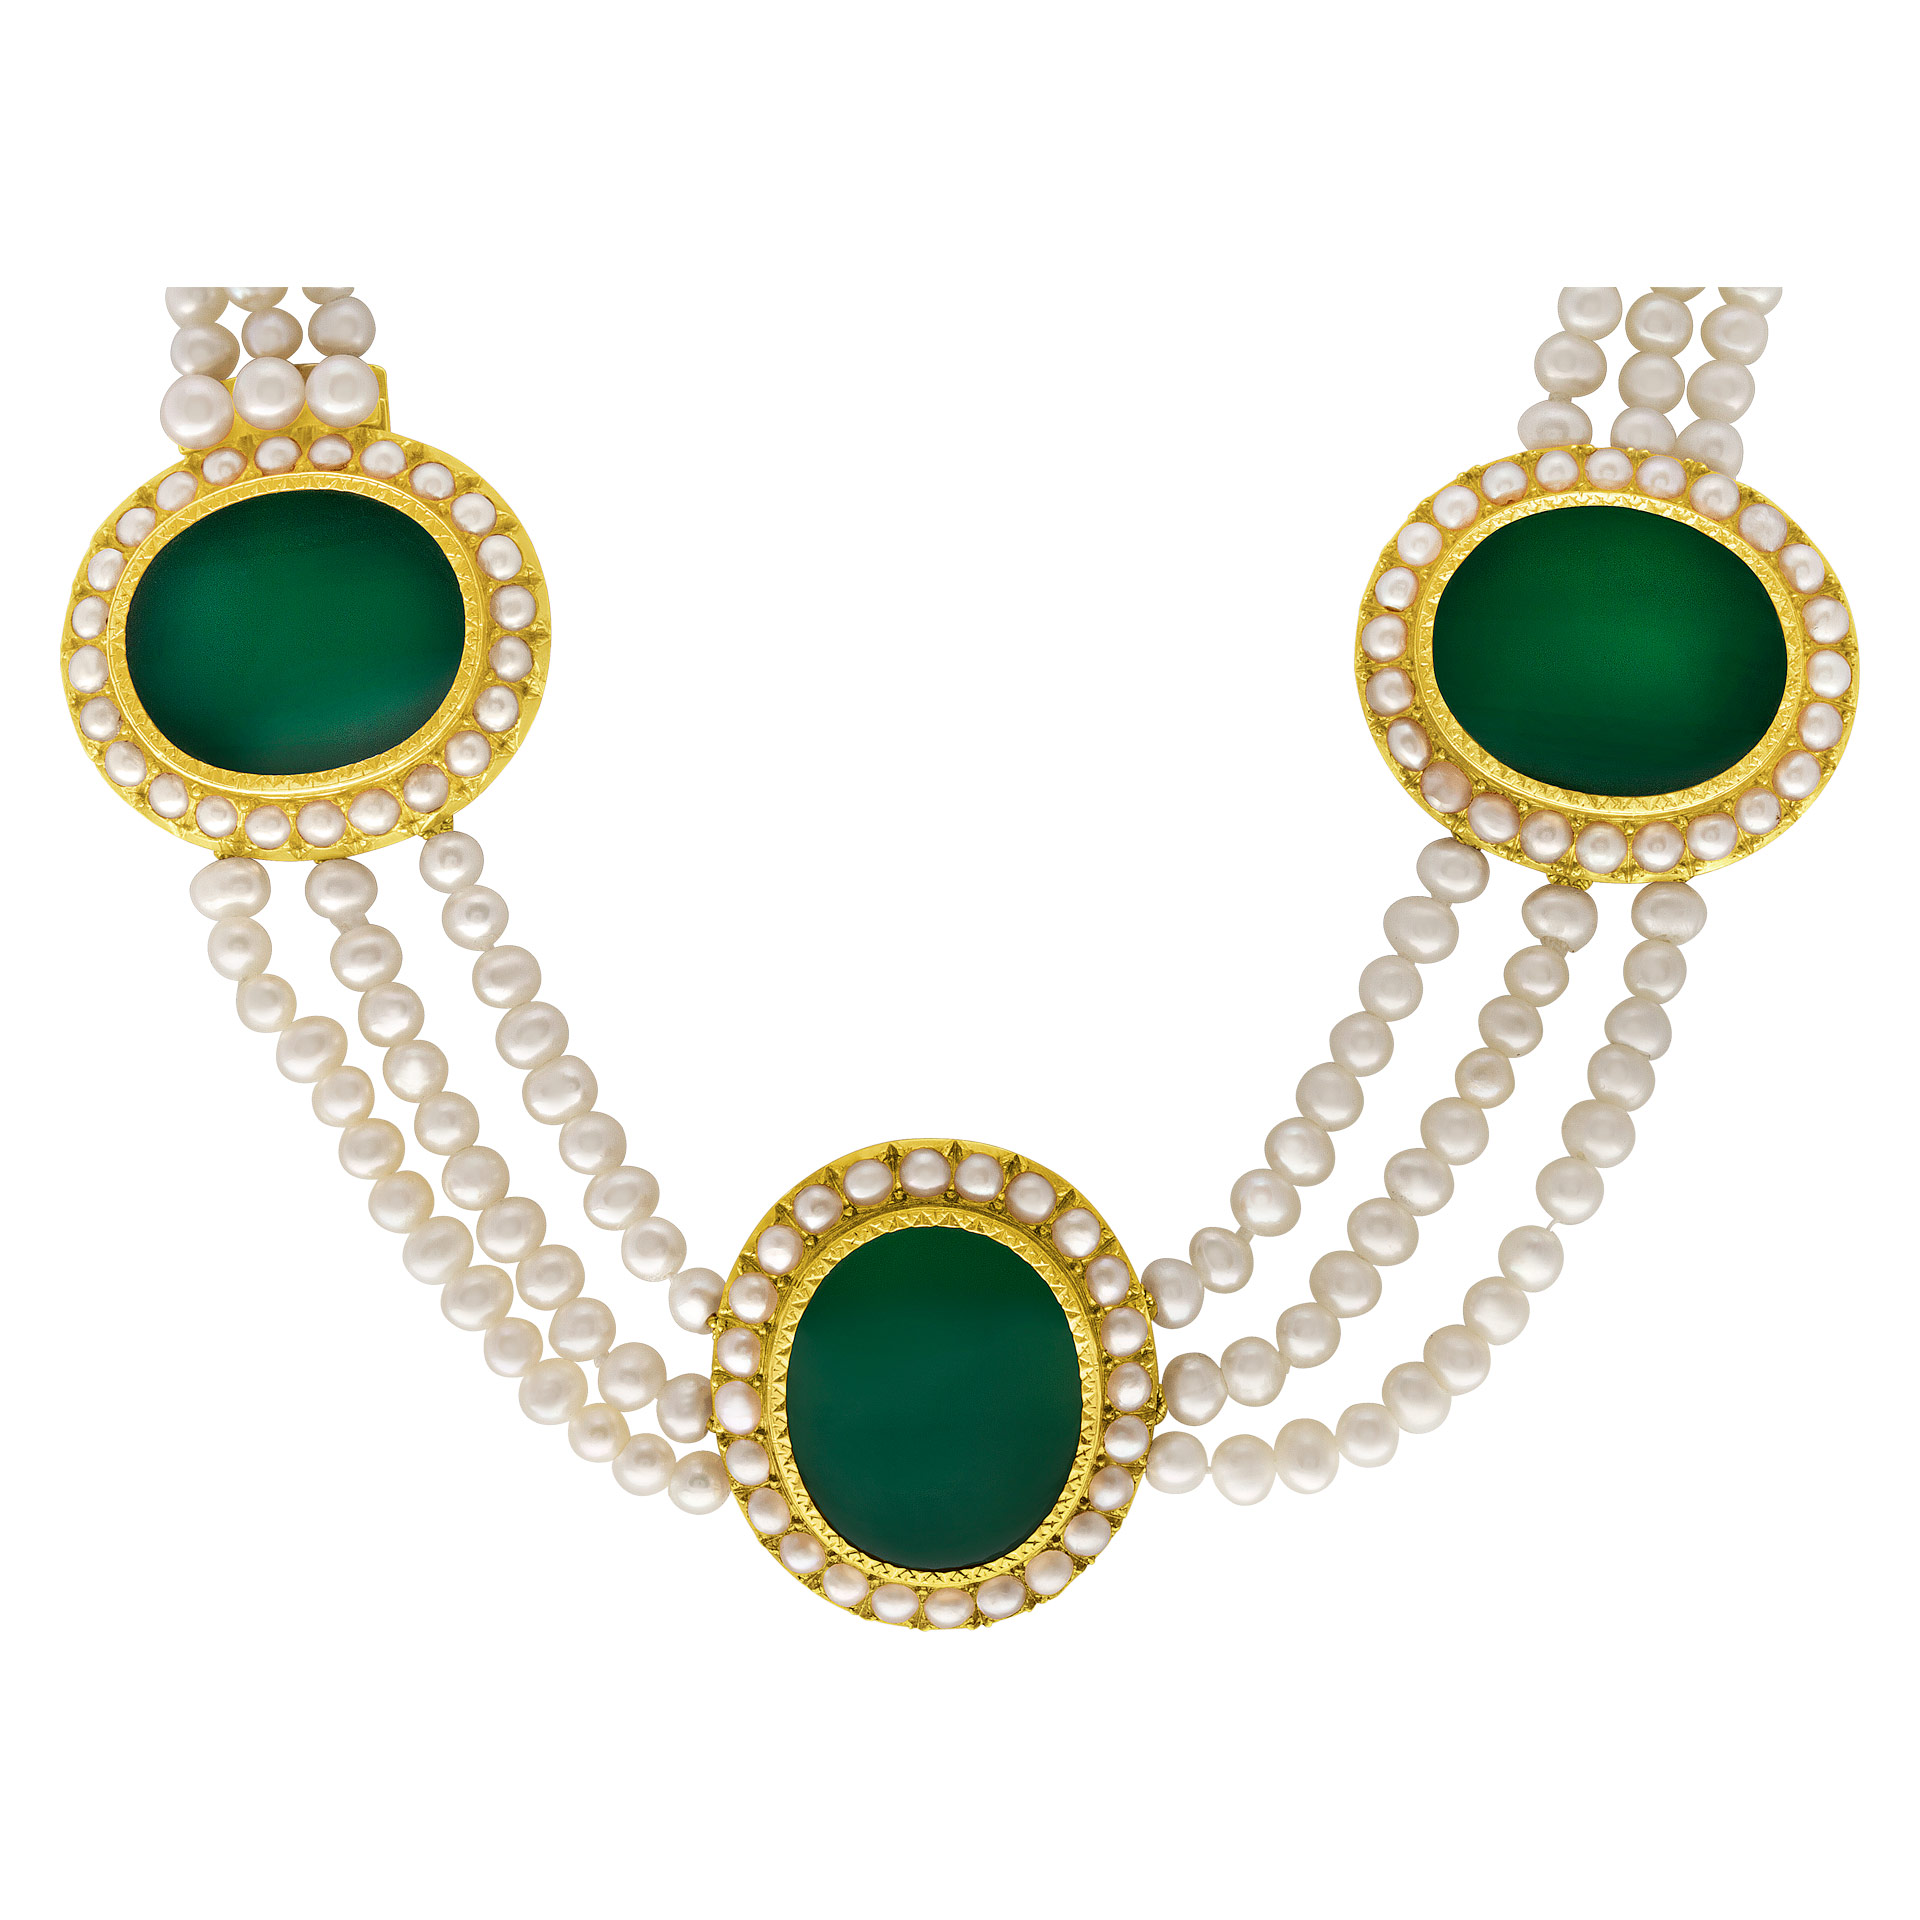 Amazing vintage jade and pearl necklace in 18k